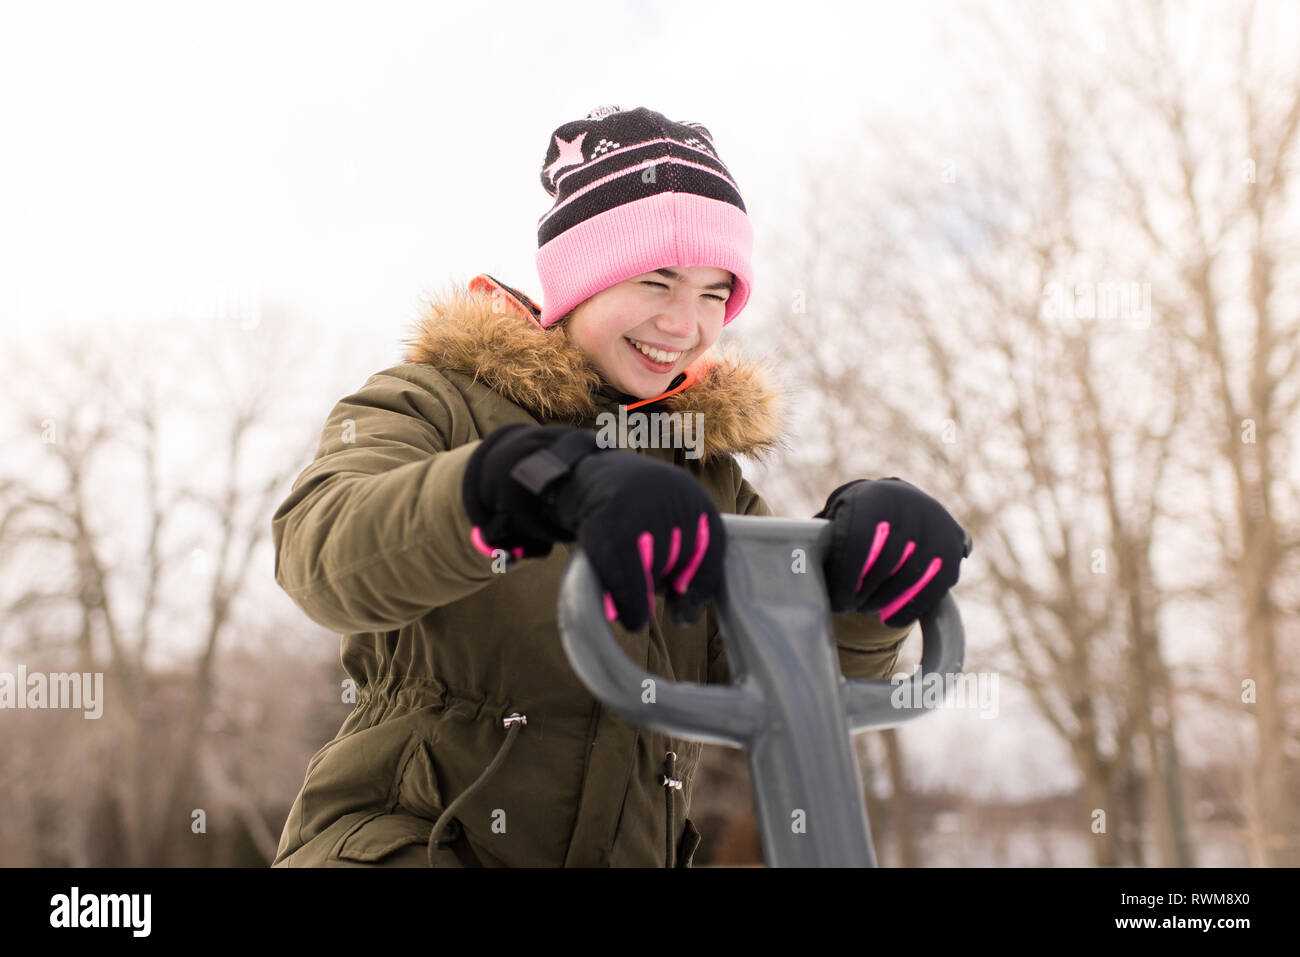 Girl in knit hat laughing on playground equipment Stock Photo